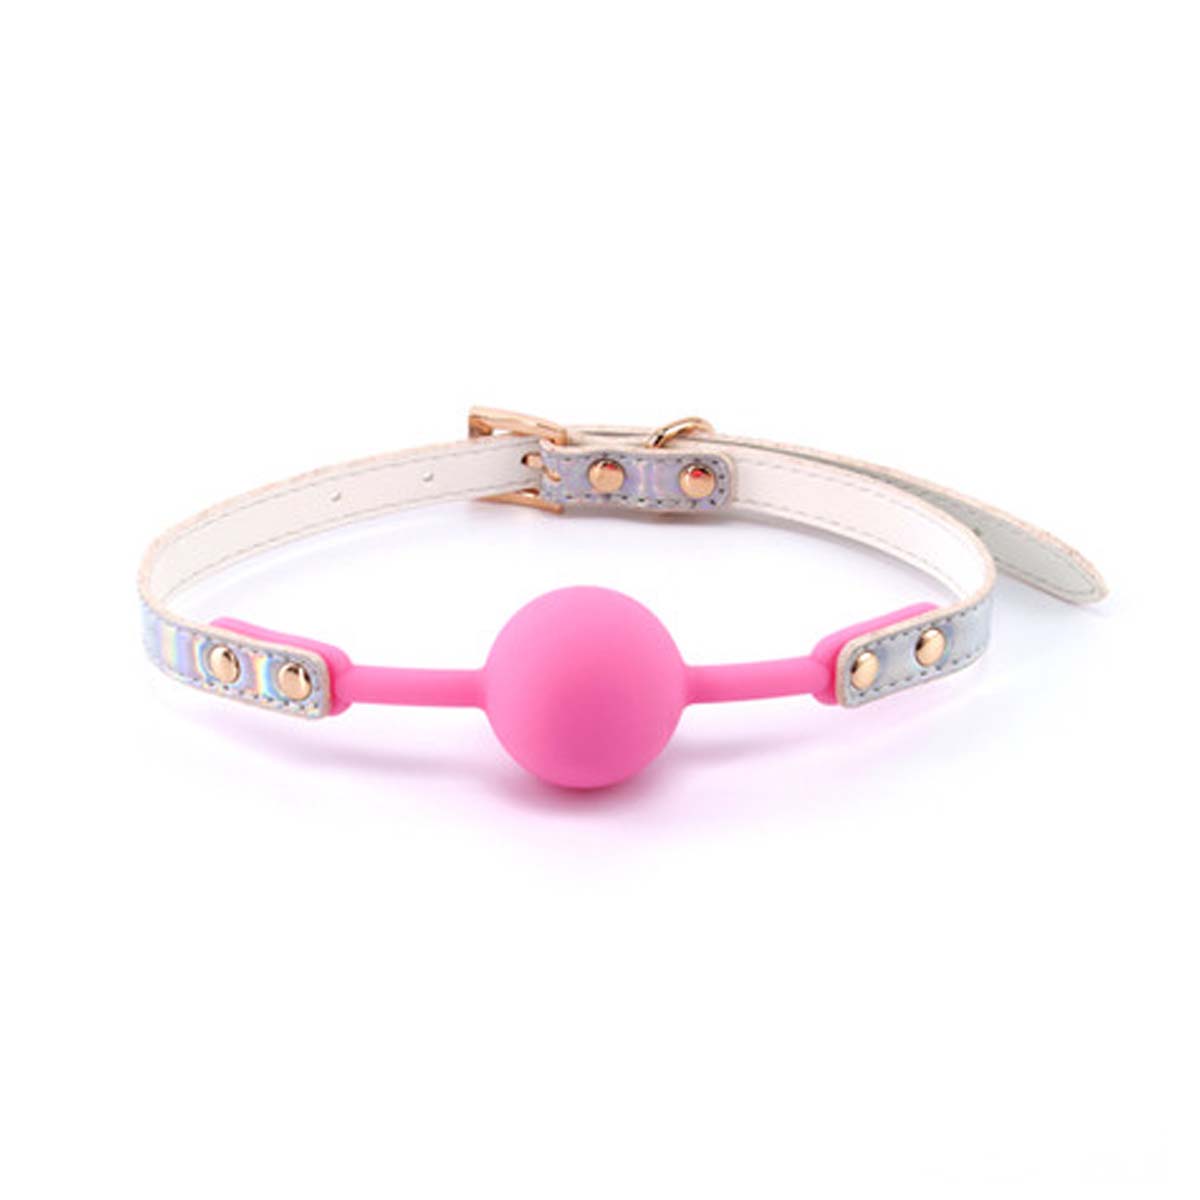 Holograpgic vinyl ball gag with pink silicone ball Nudie Co